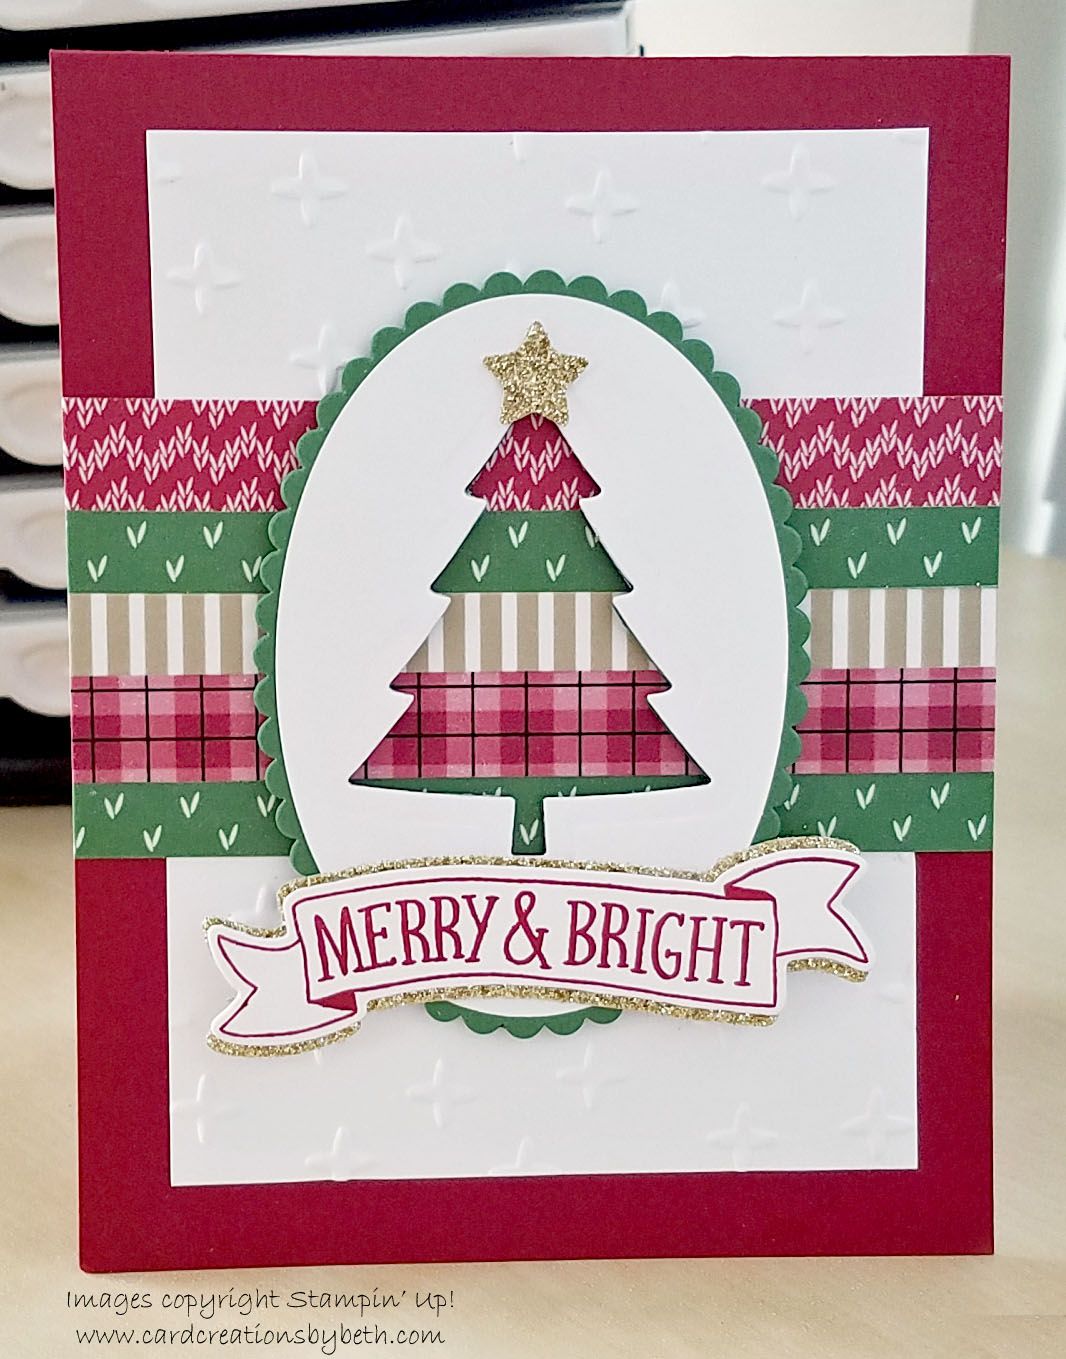 easy-diy-christmas-cards-ideas-the-post-s-popularity-told-us-that